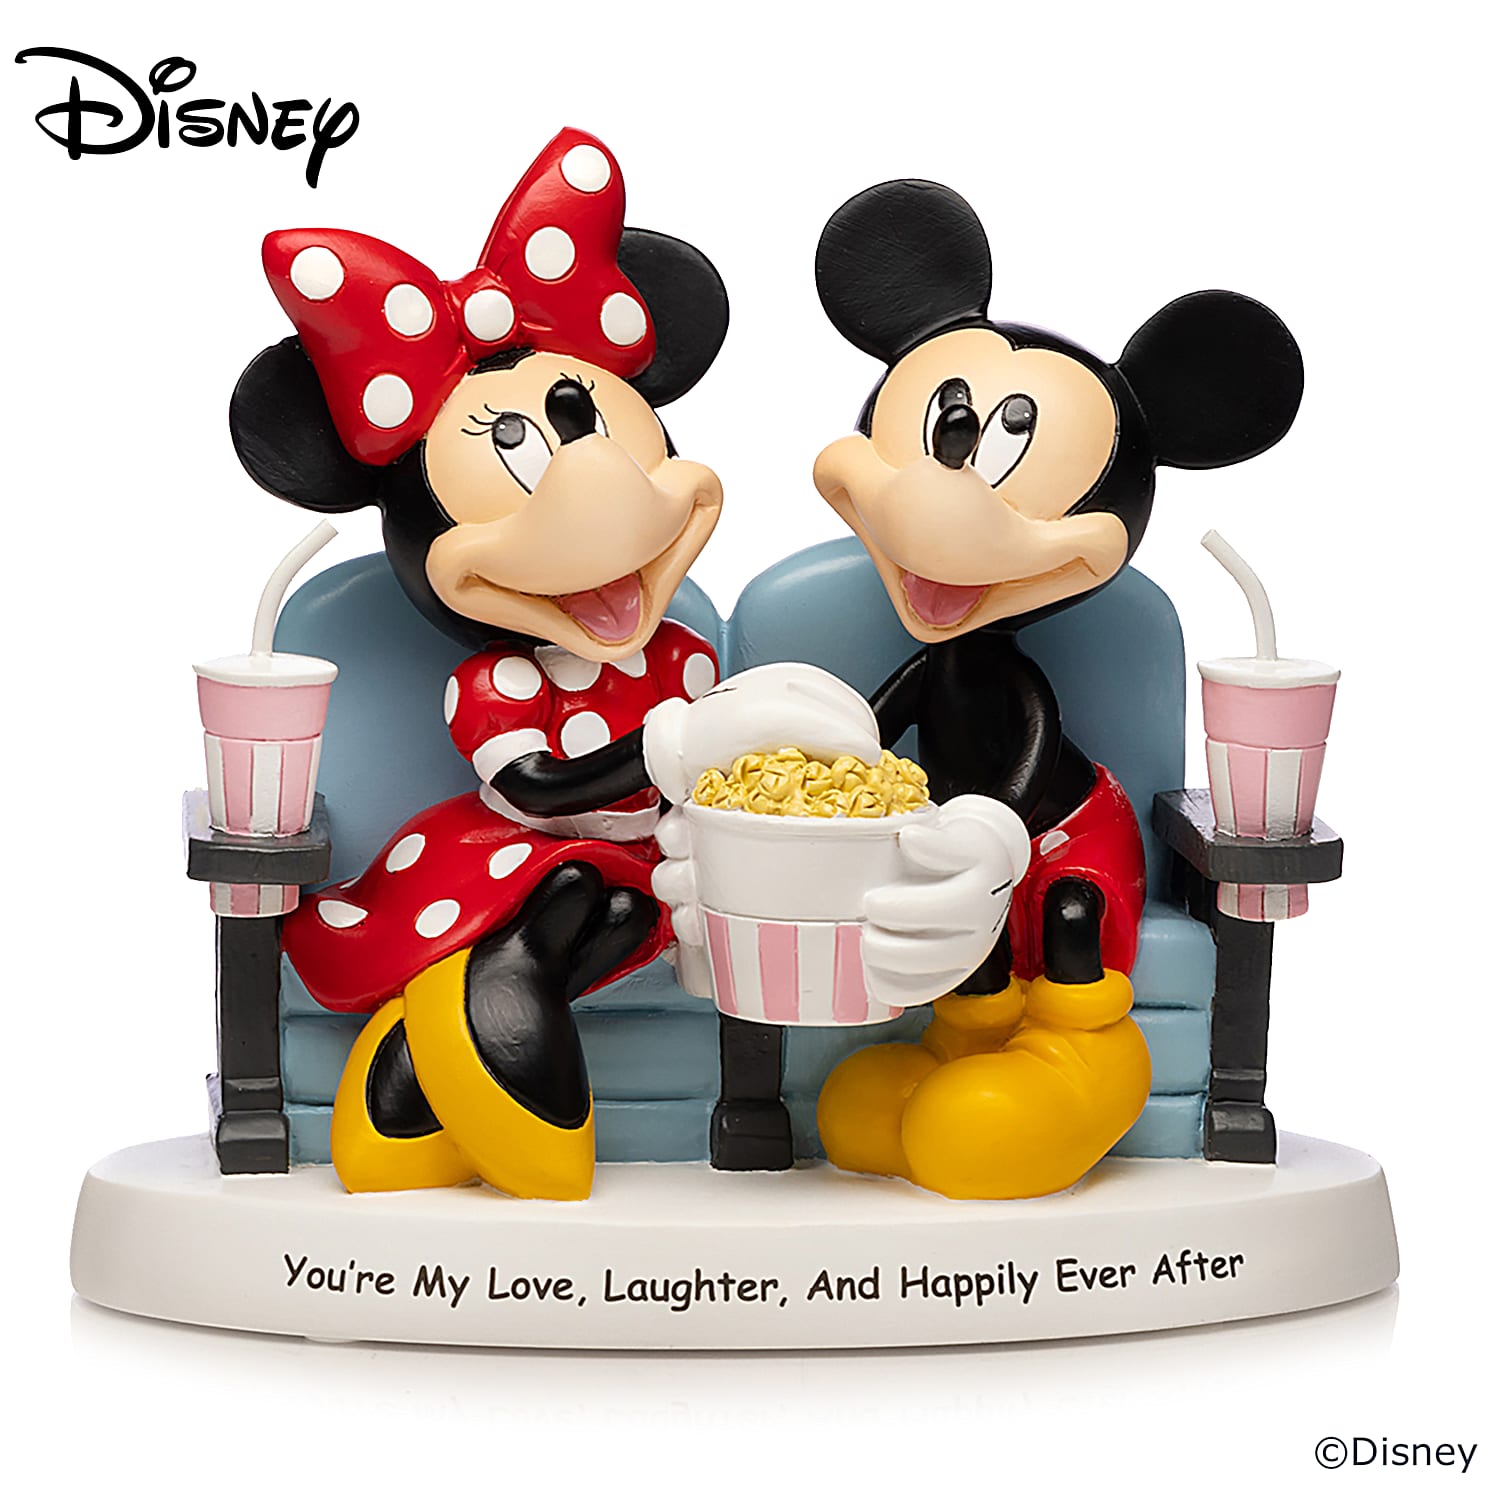 Disney Youre My Love, Laughter, And Happily Ever After Hand-Painted  Figurine Featuring Mickey Mouse & Minnie Mouse Watching A Movie & Eating  Popcorn Together